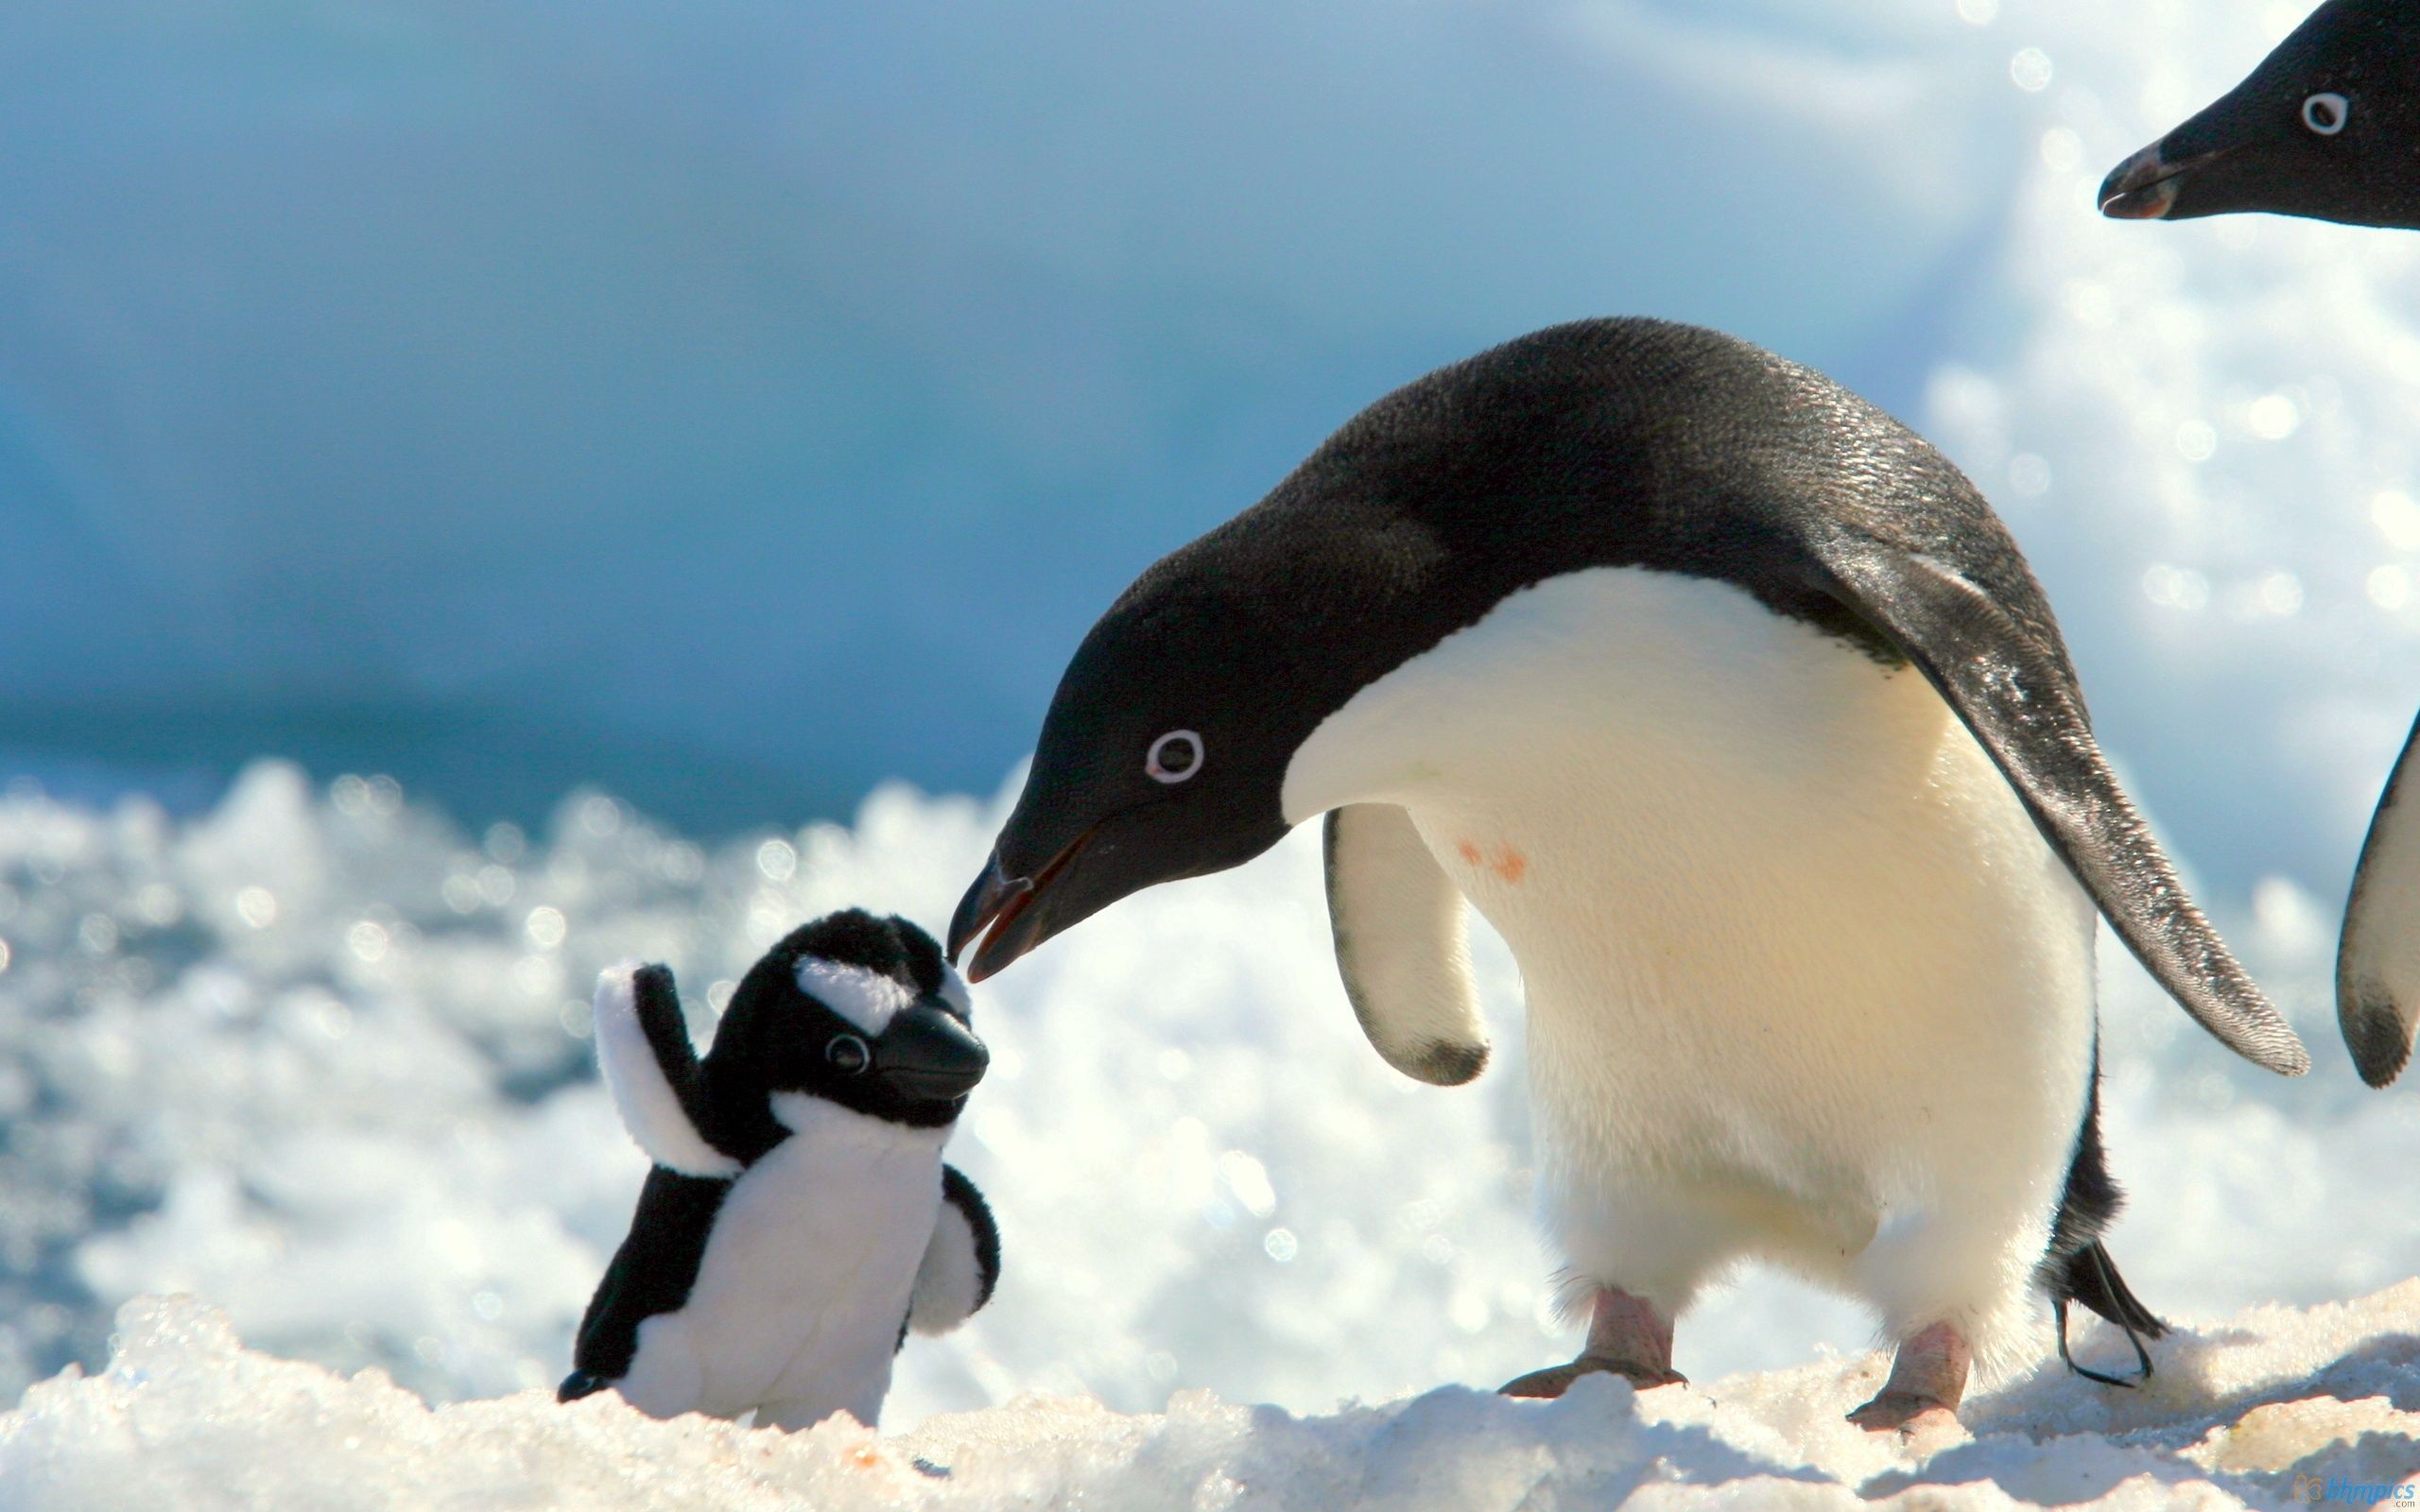 care, animals, pinguins, snow, young, joey